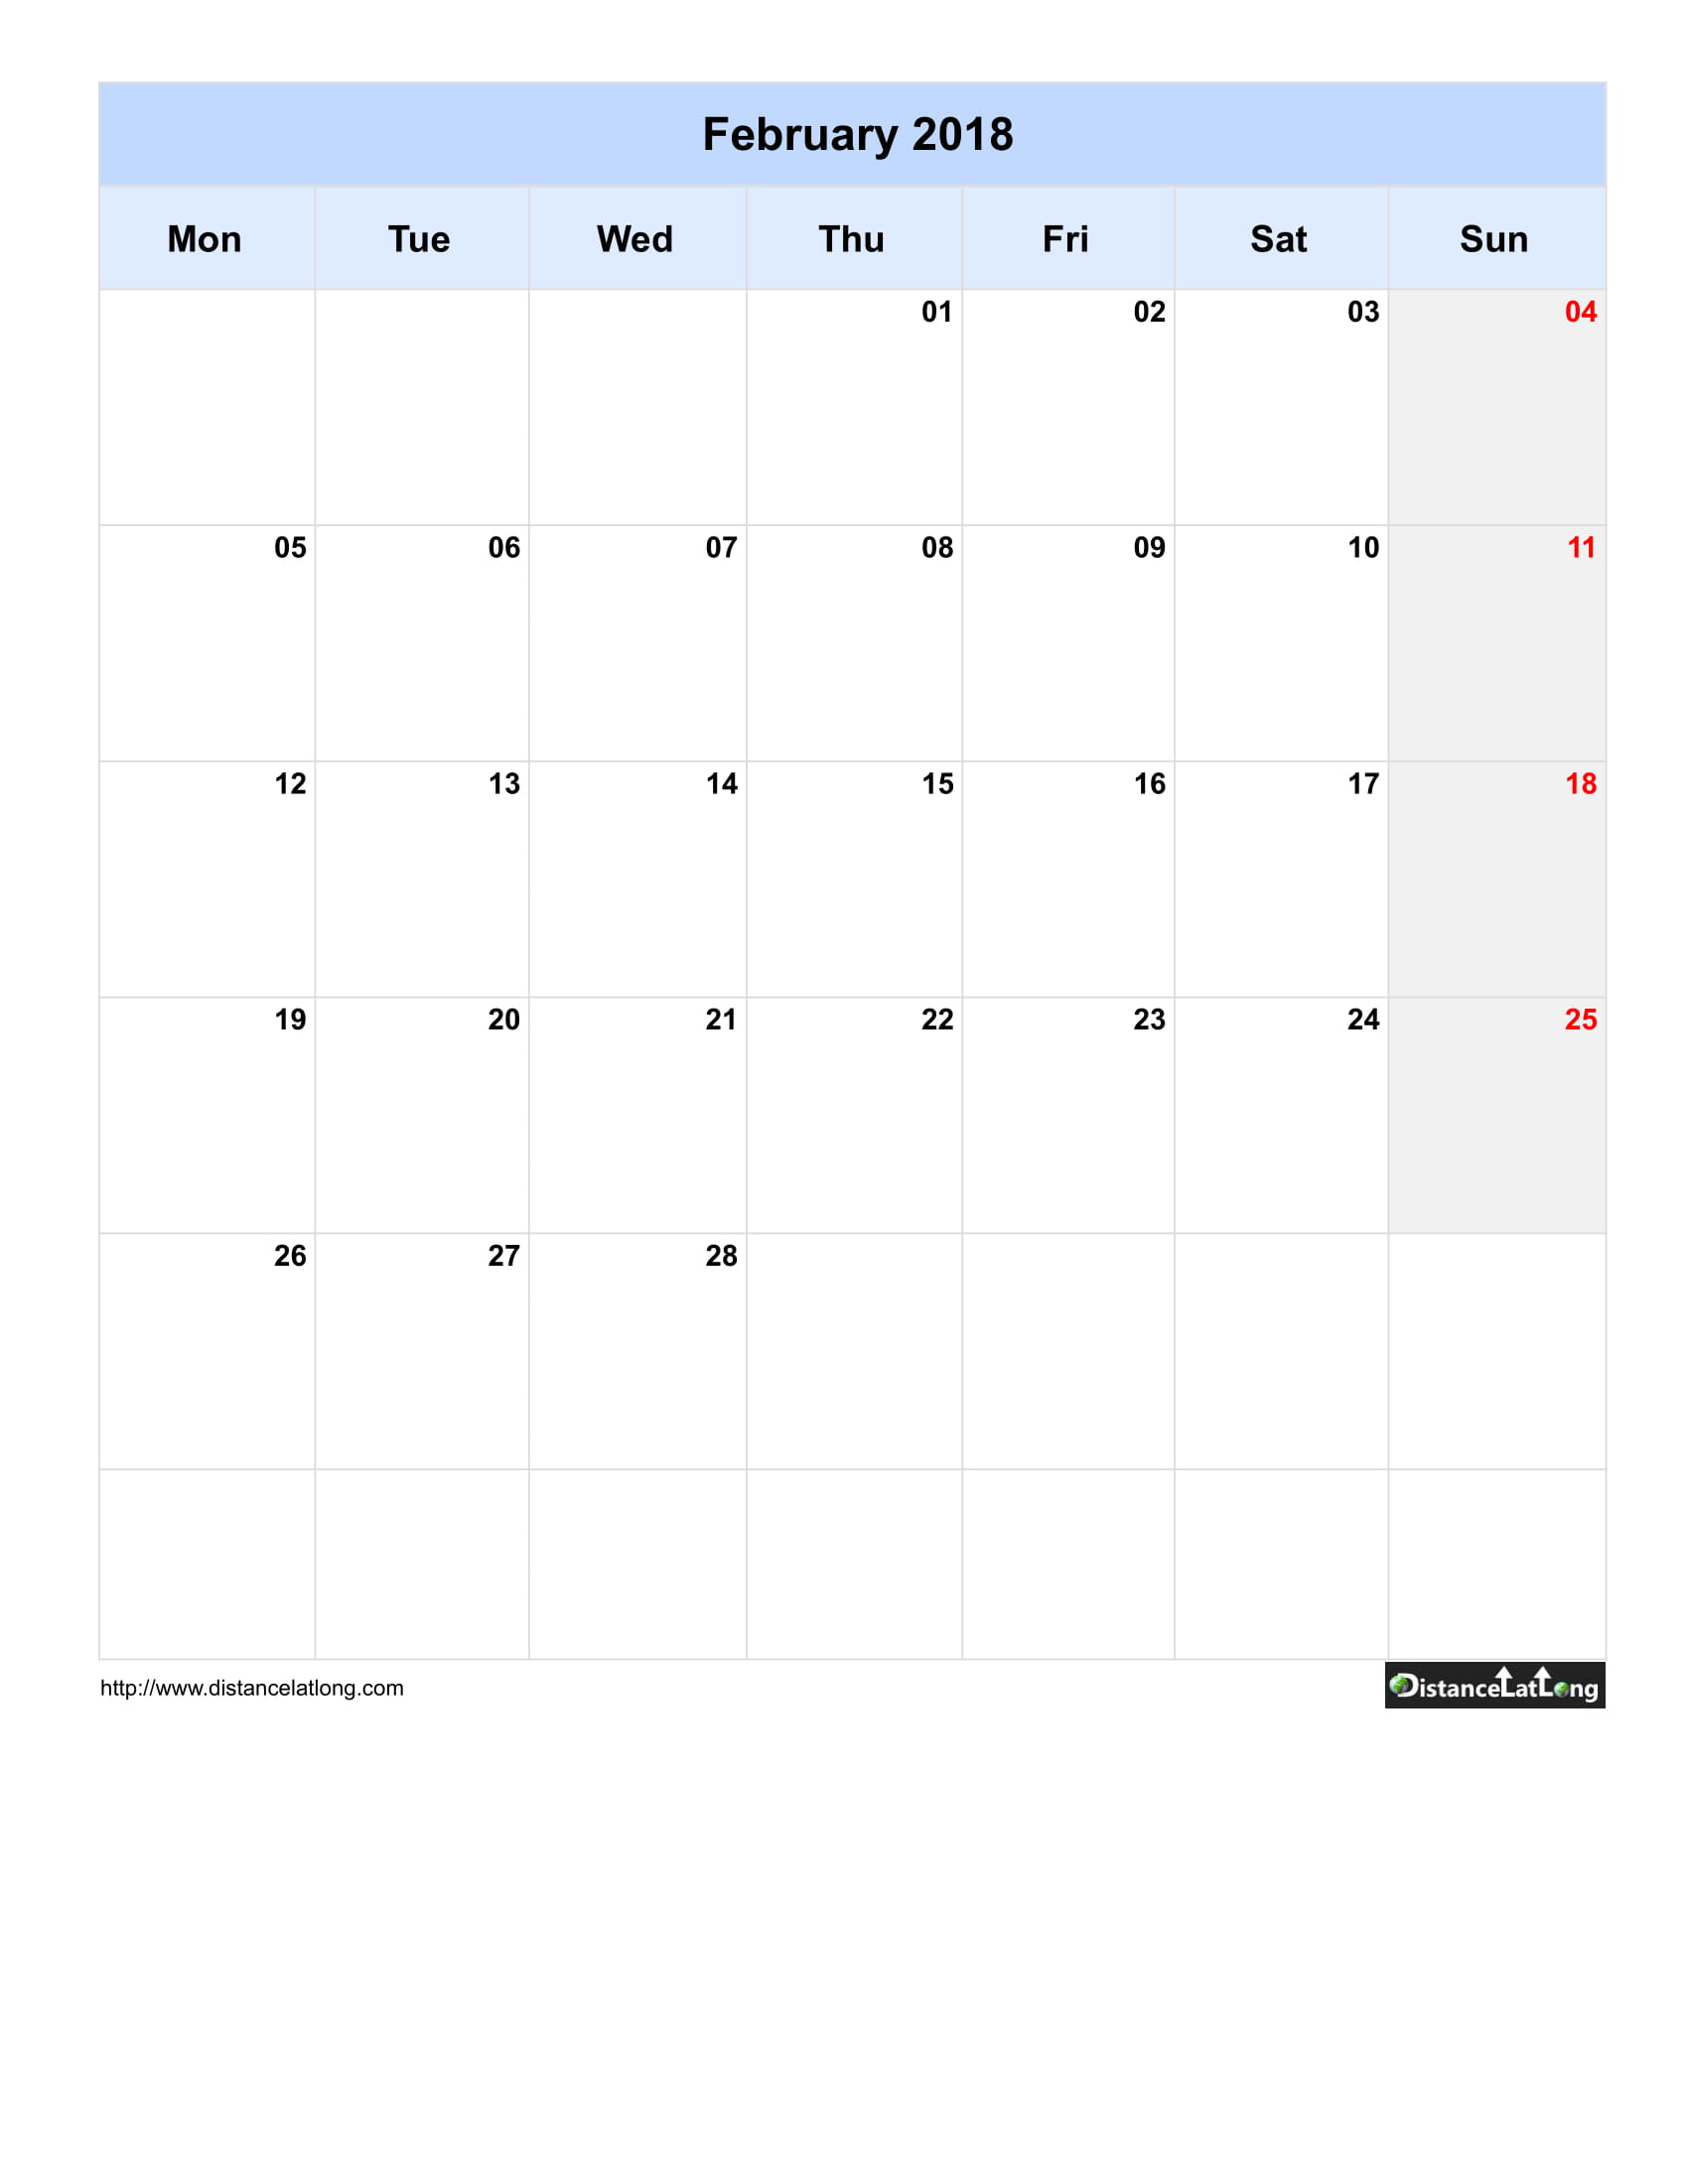 free-monthly-printable-blank-calendar-for-february-2018-monday-to-sunday